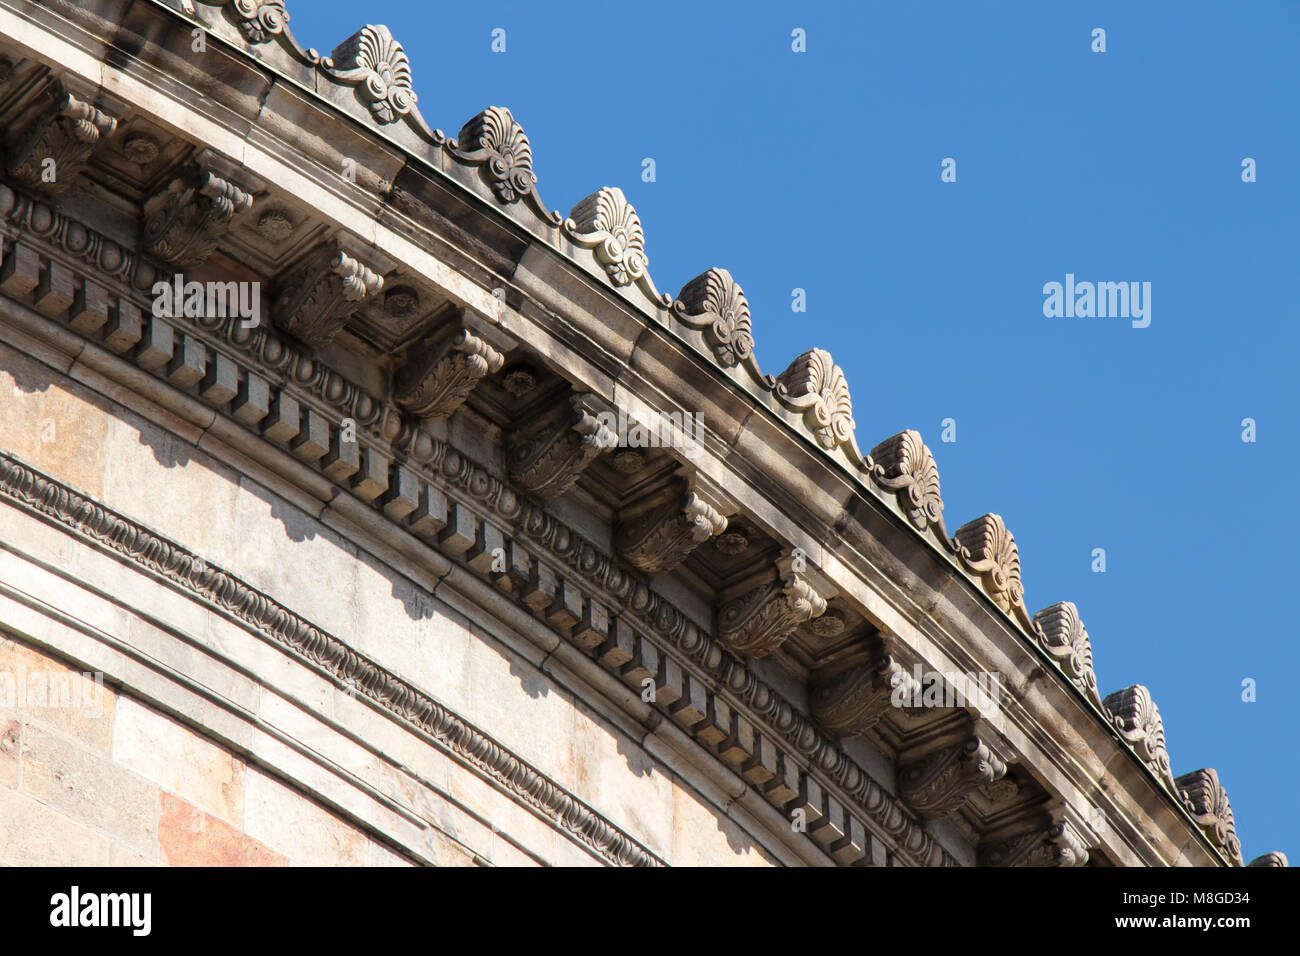 Detail of a neoclassical building with round cornice ornaments against a blue sky Stock Photo